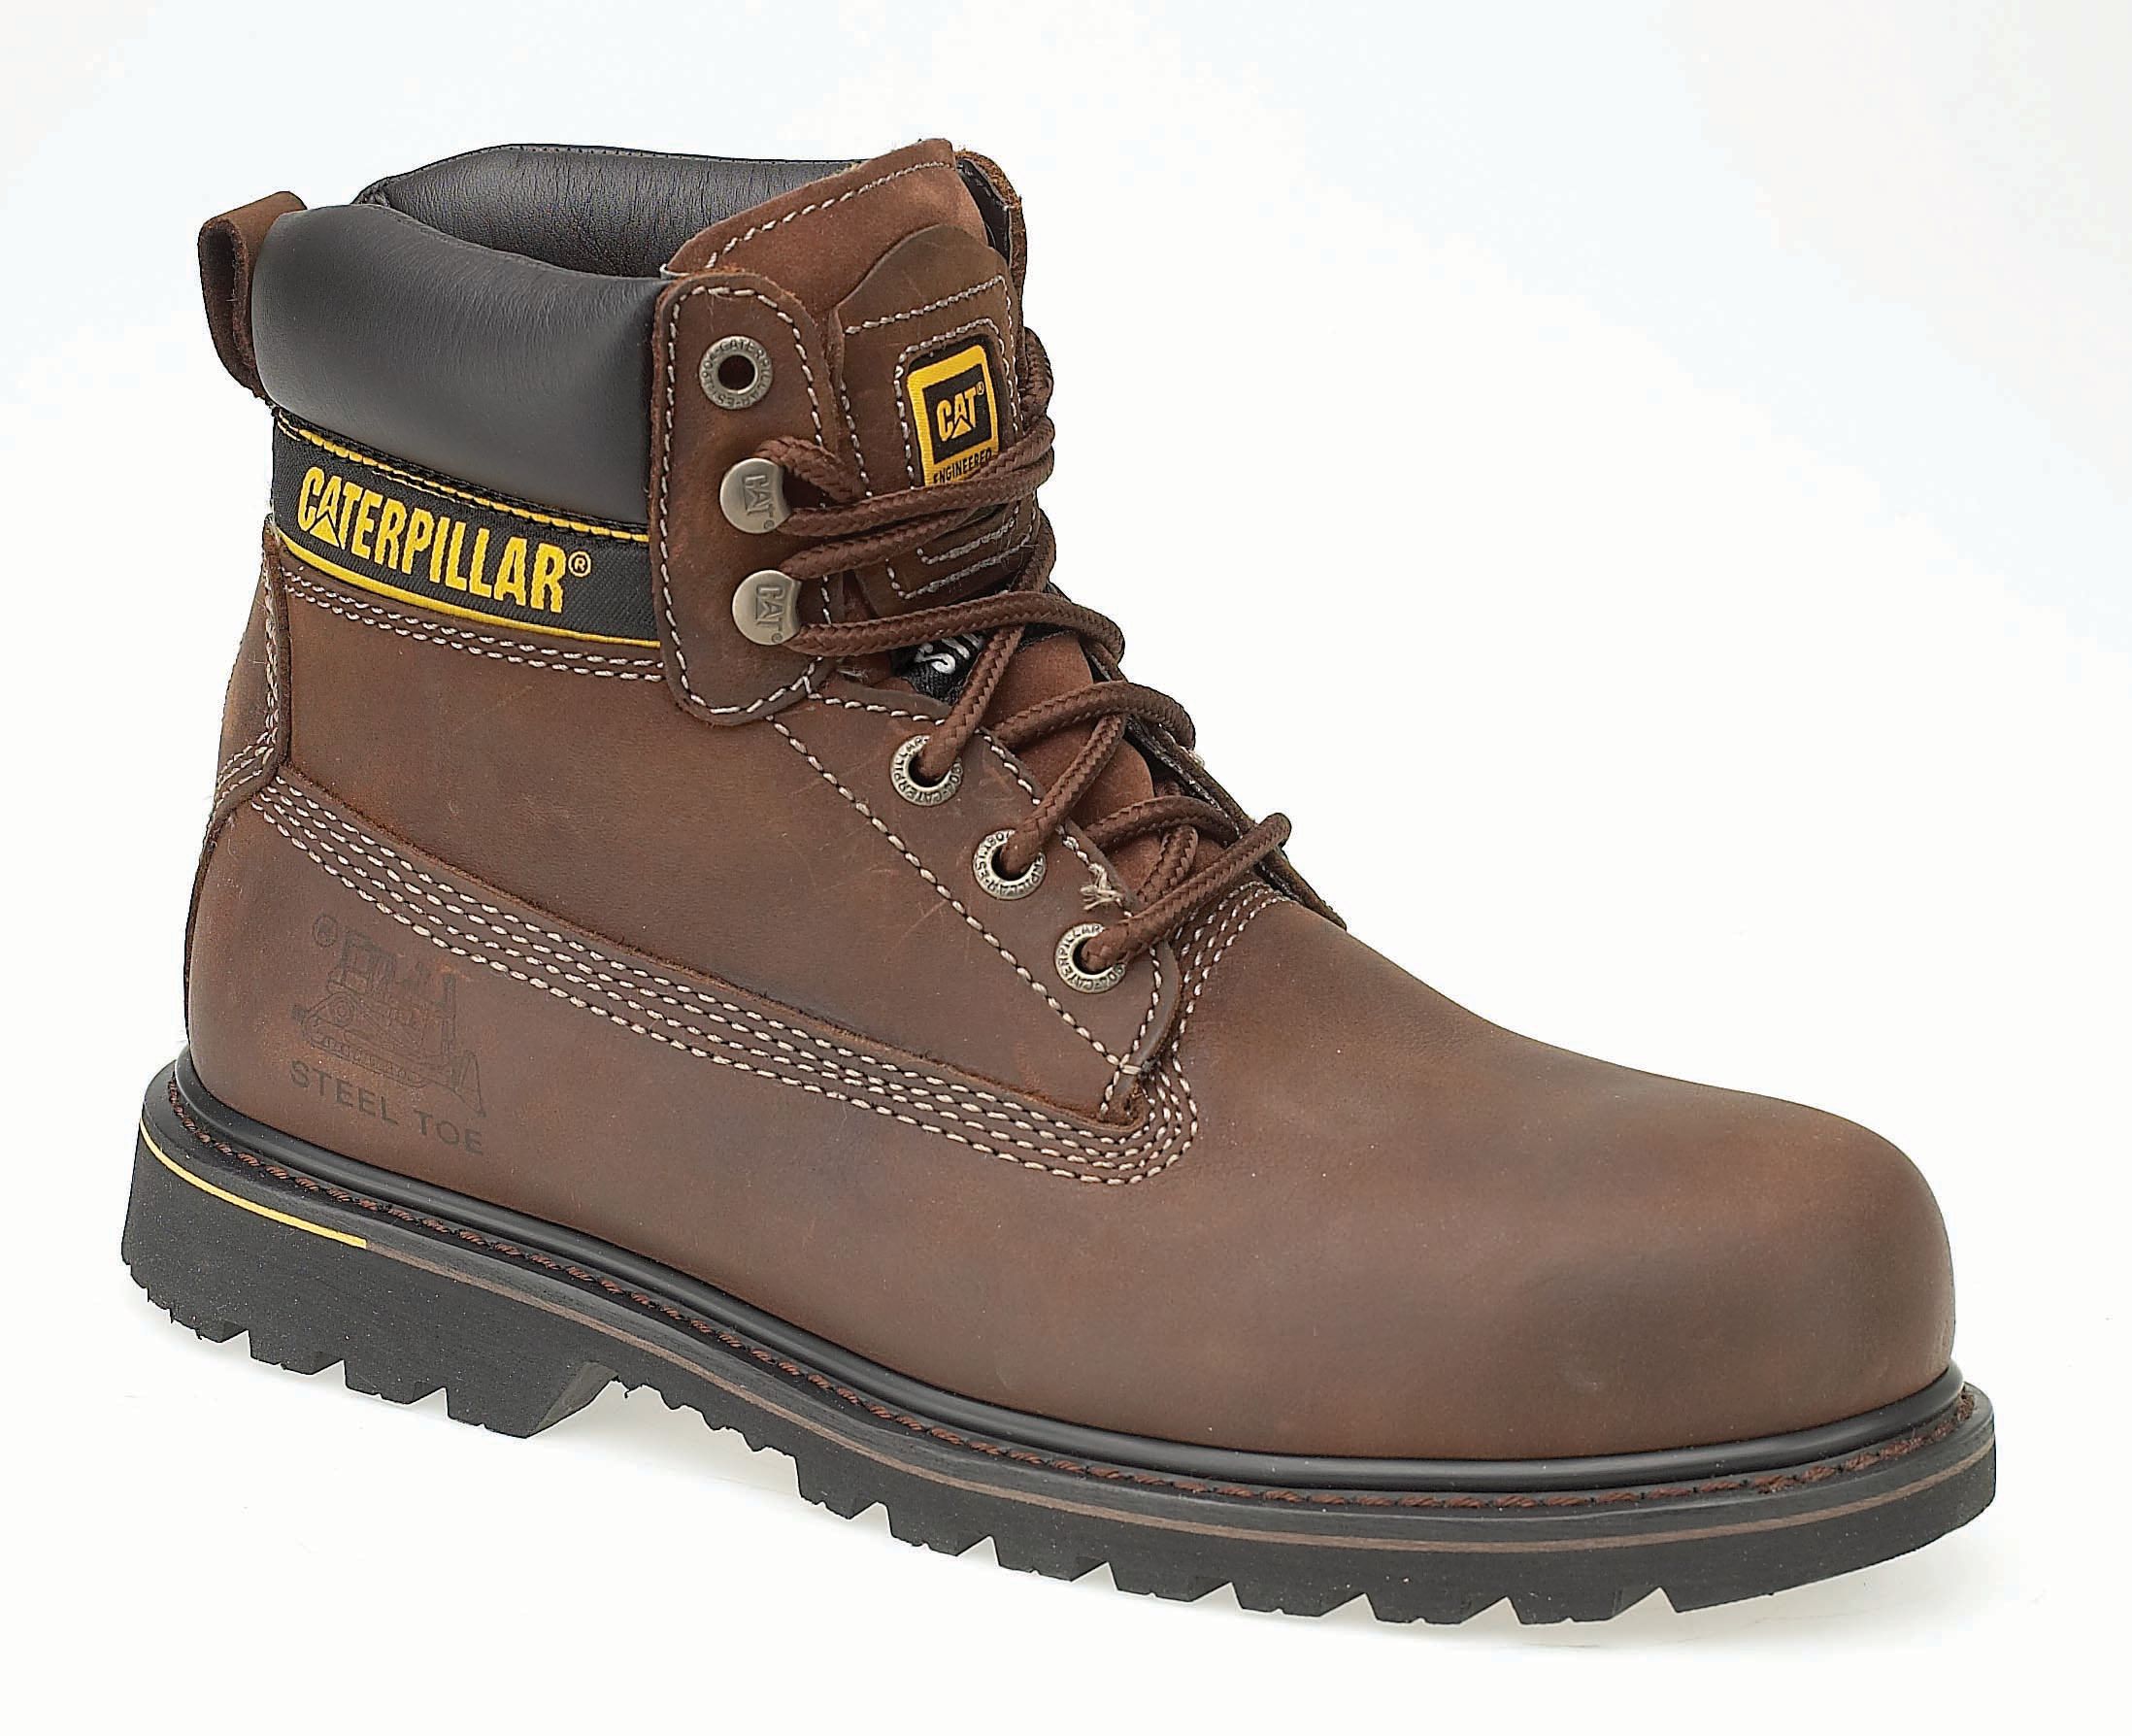 Image of Caterpillar CAT Holton SB Safety Boot - Brown Size 10